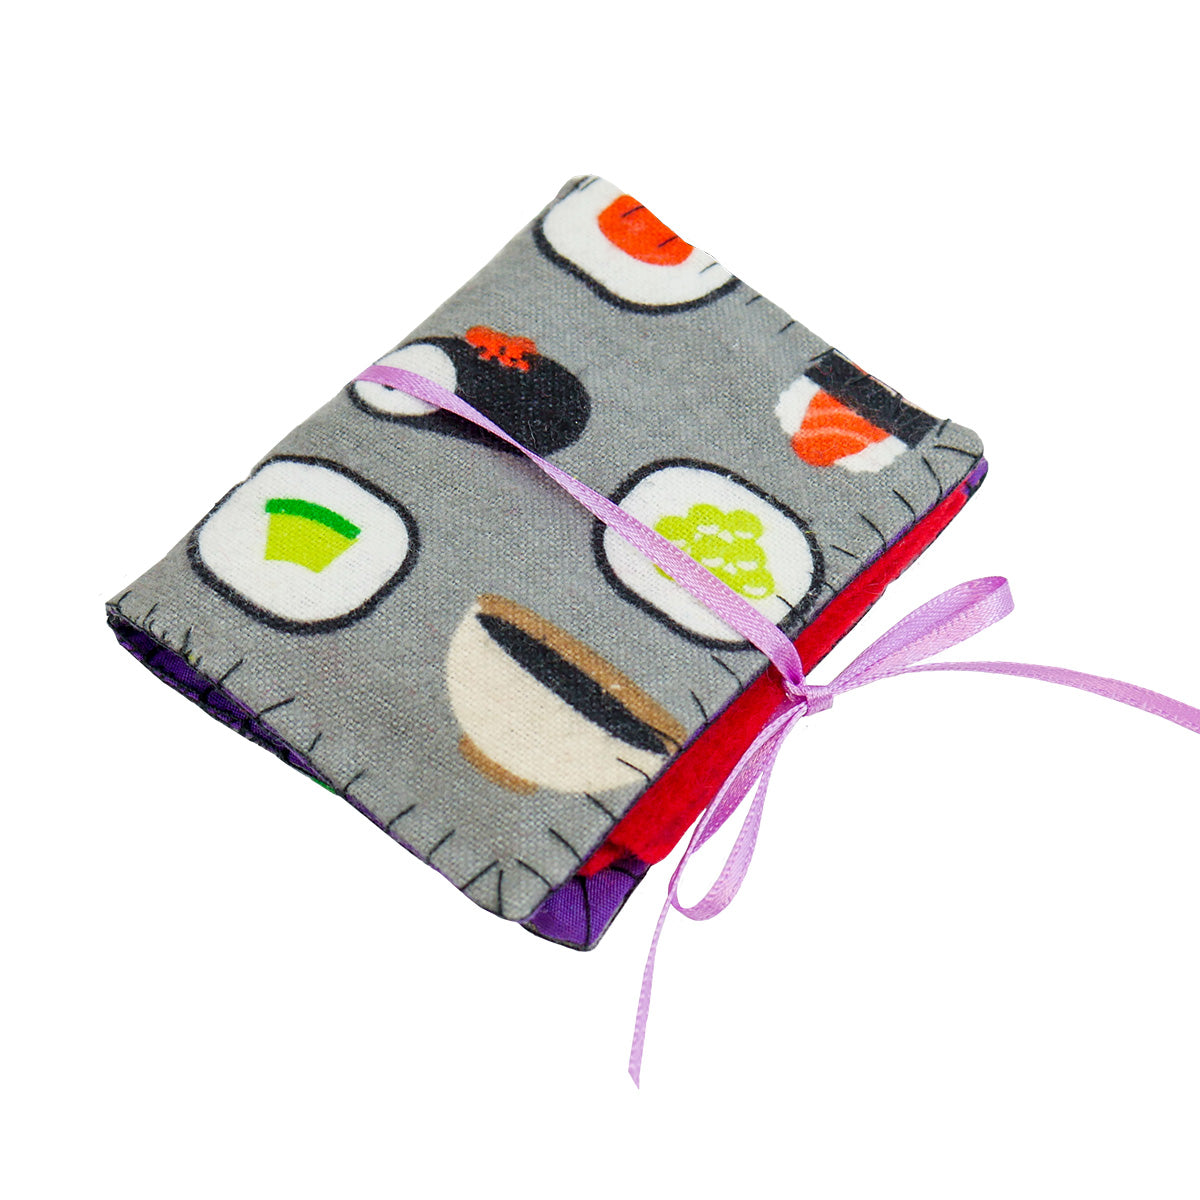 A single completed Needle Book with sushi patterned fabric on the outside, red felt pages on the inside, and a thin light pink ribbon tying it closed around with a bow.